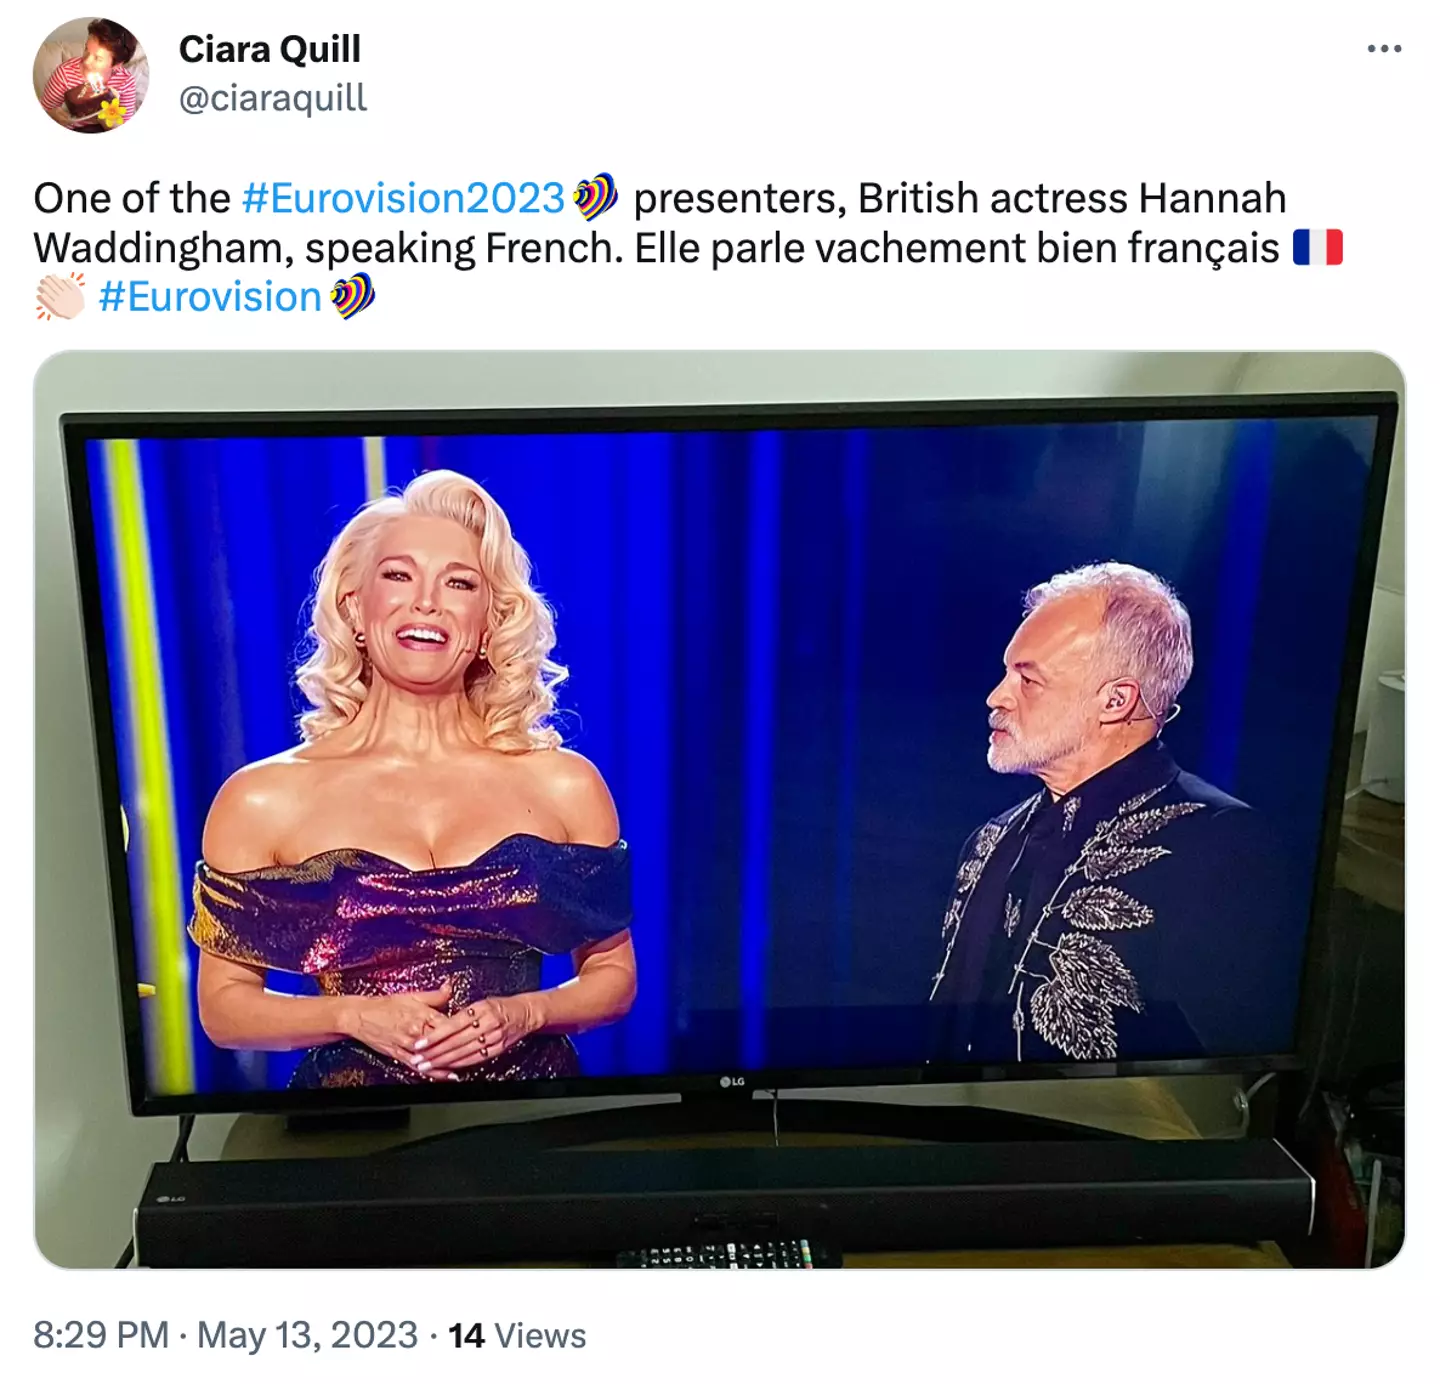 Viewers were baffled by Hannah Waddingham speaking French.